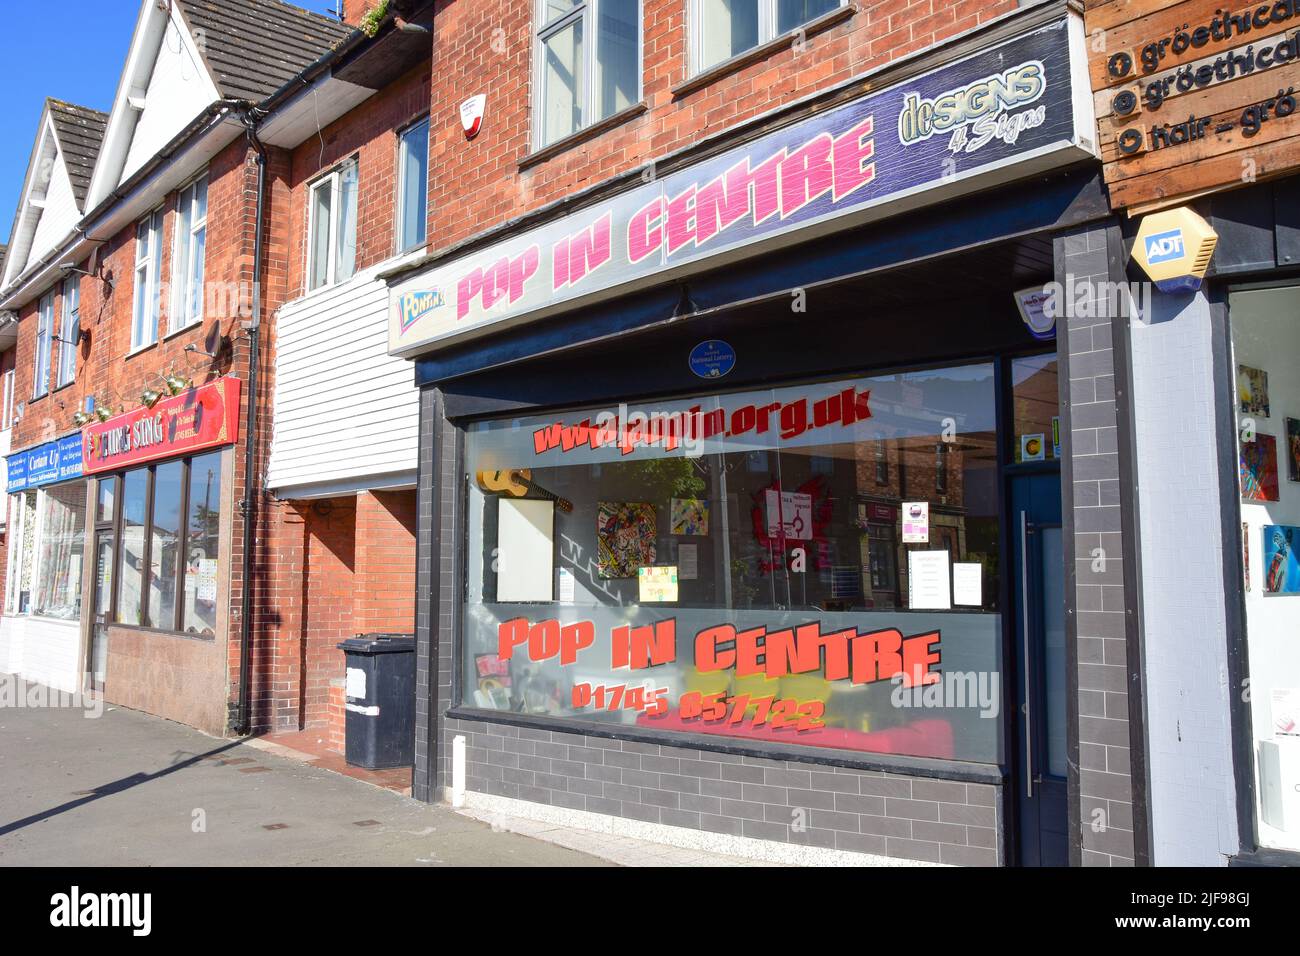 Prestatyn, UK. Jun 22, 2022. Meliden Road has a mixture of residential and commercial properties, including a Pop In Centre and youth cafe which opene Stock Photo